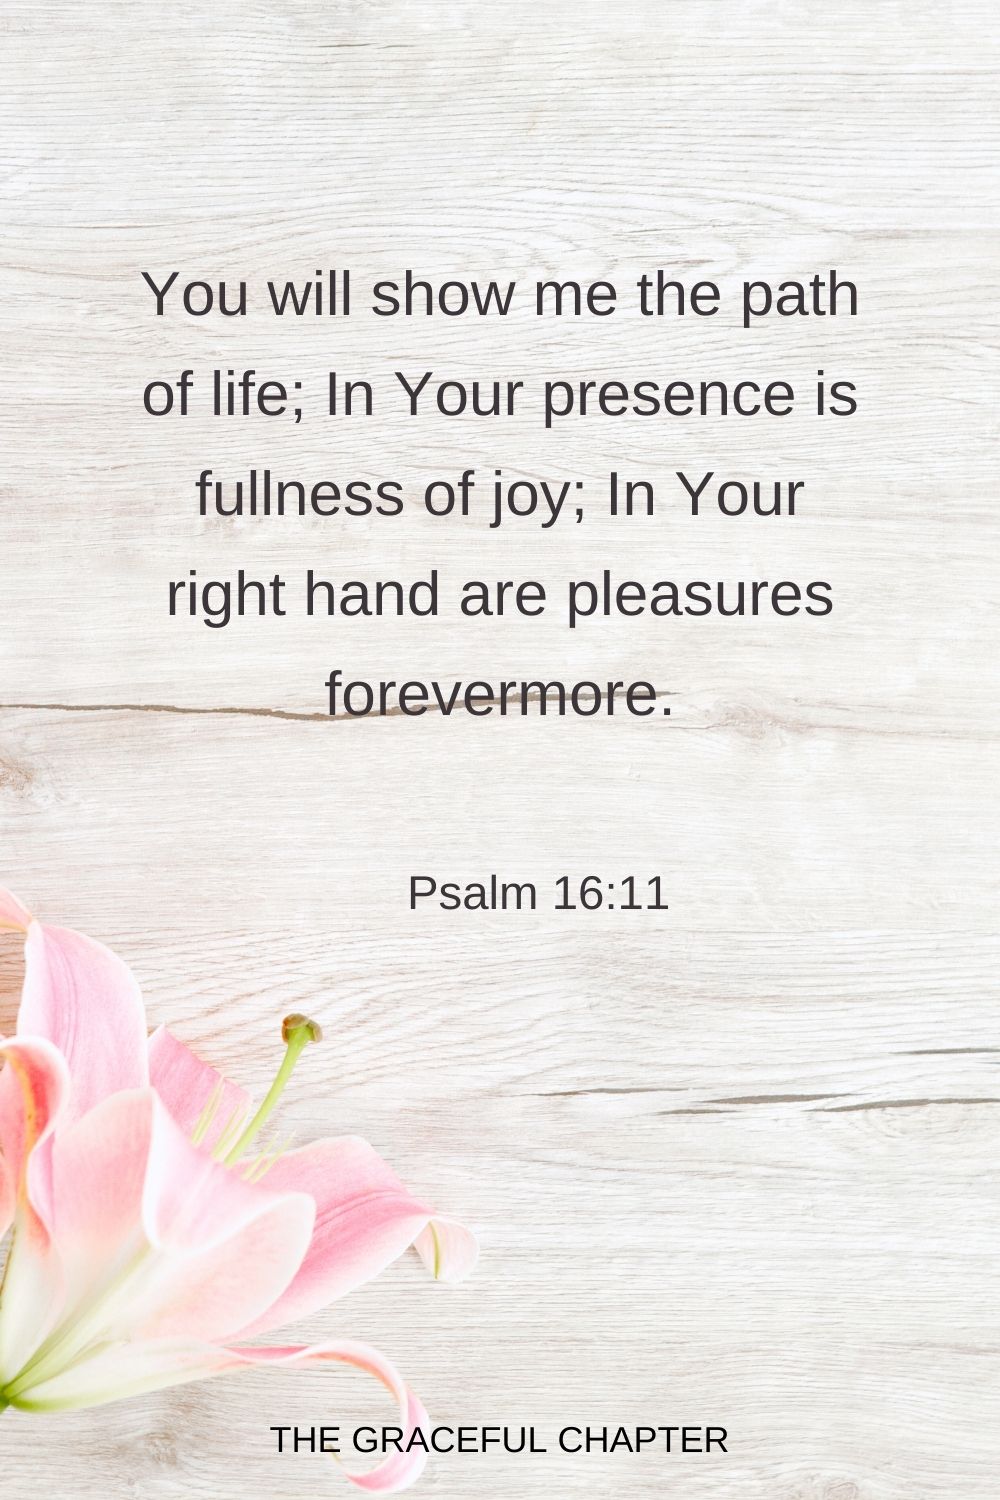 You will show me the path of life; In Your presence is fullness of joy; At Your right hand are pleasures forevermore. Psalm 16:11